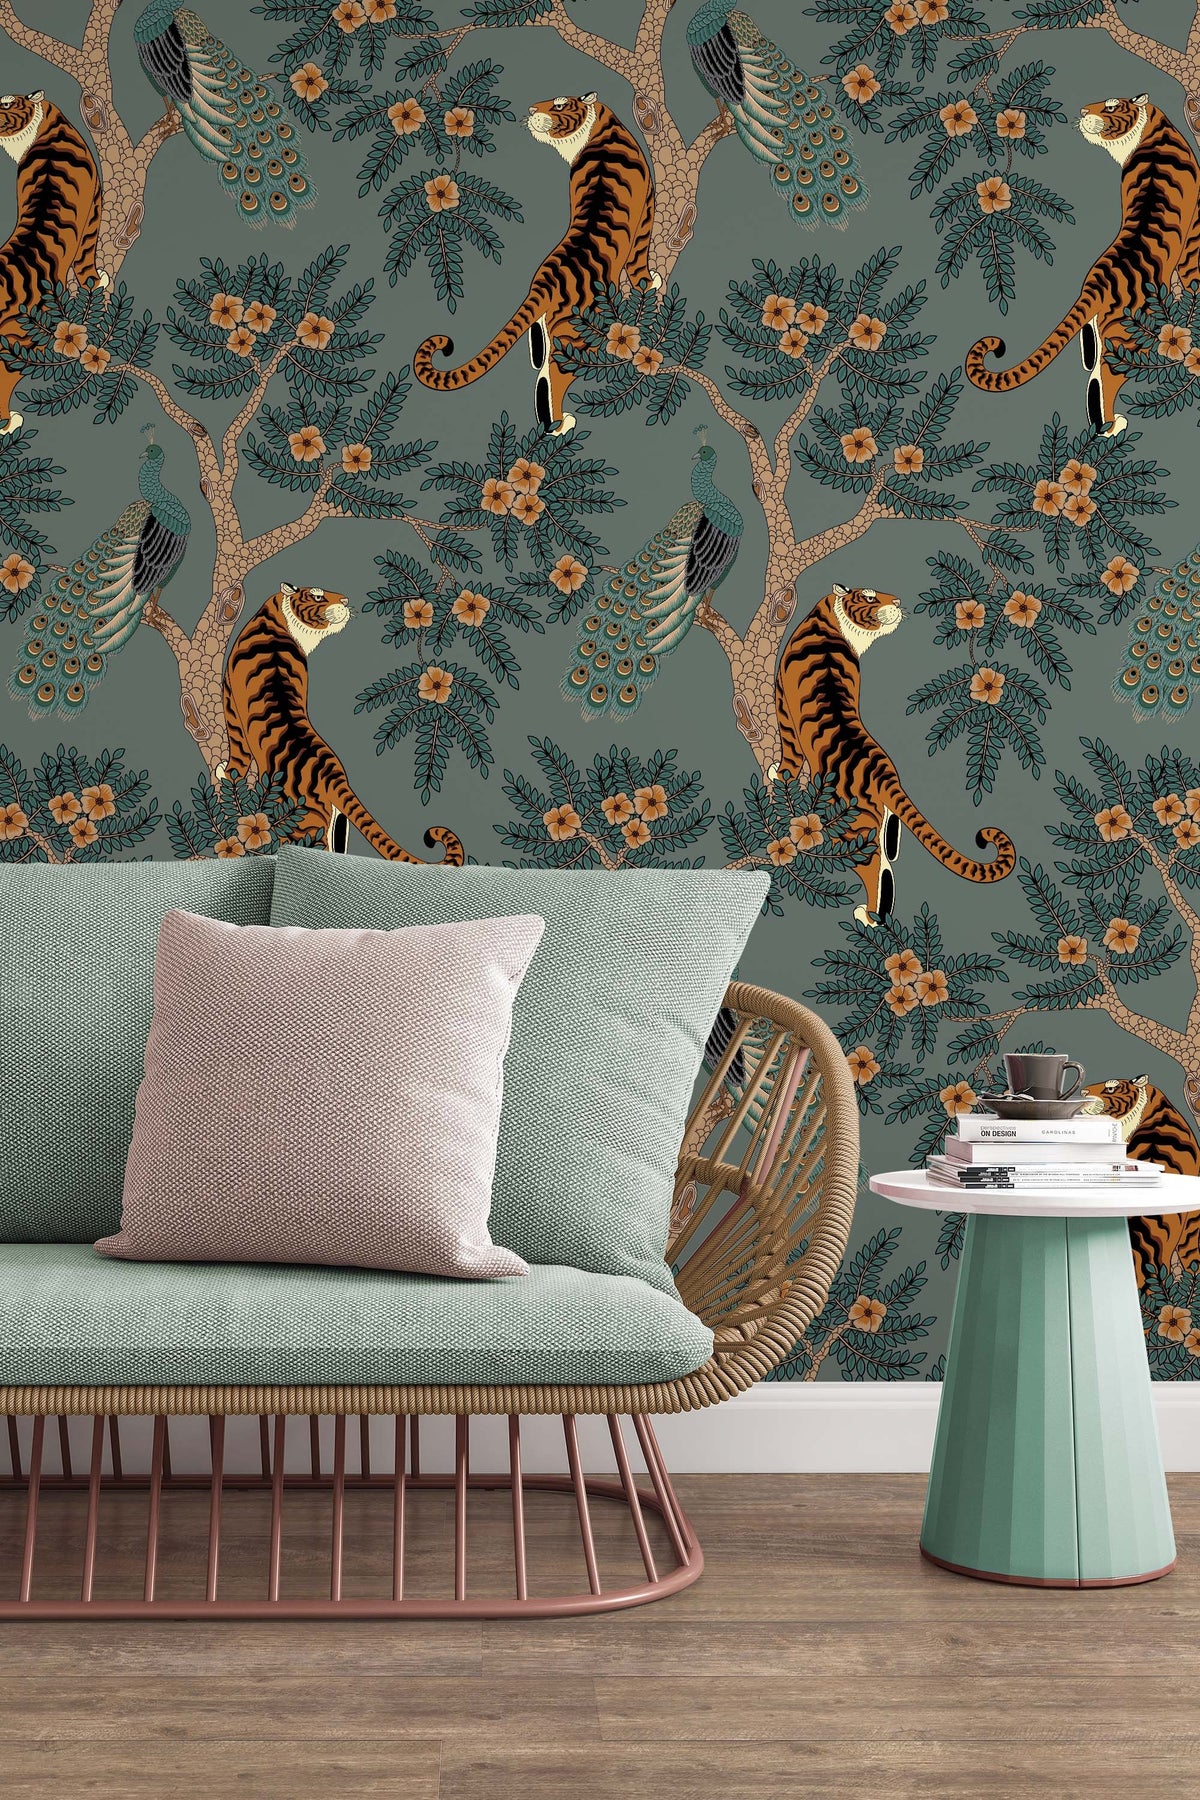 Vintage Floral Wallpaper Peacock Feathers Flower Pattern Peel and S   ONDECORCOM